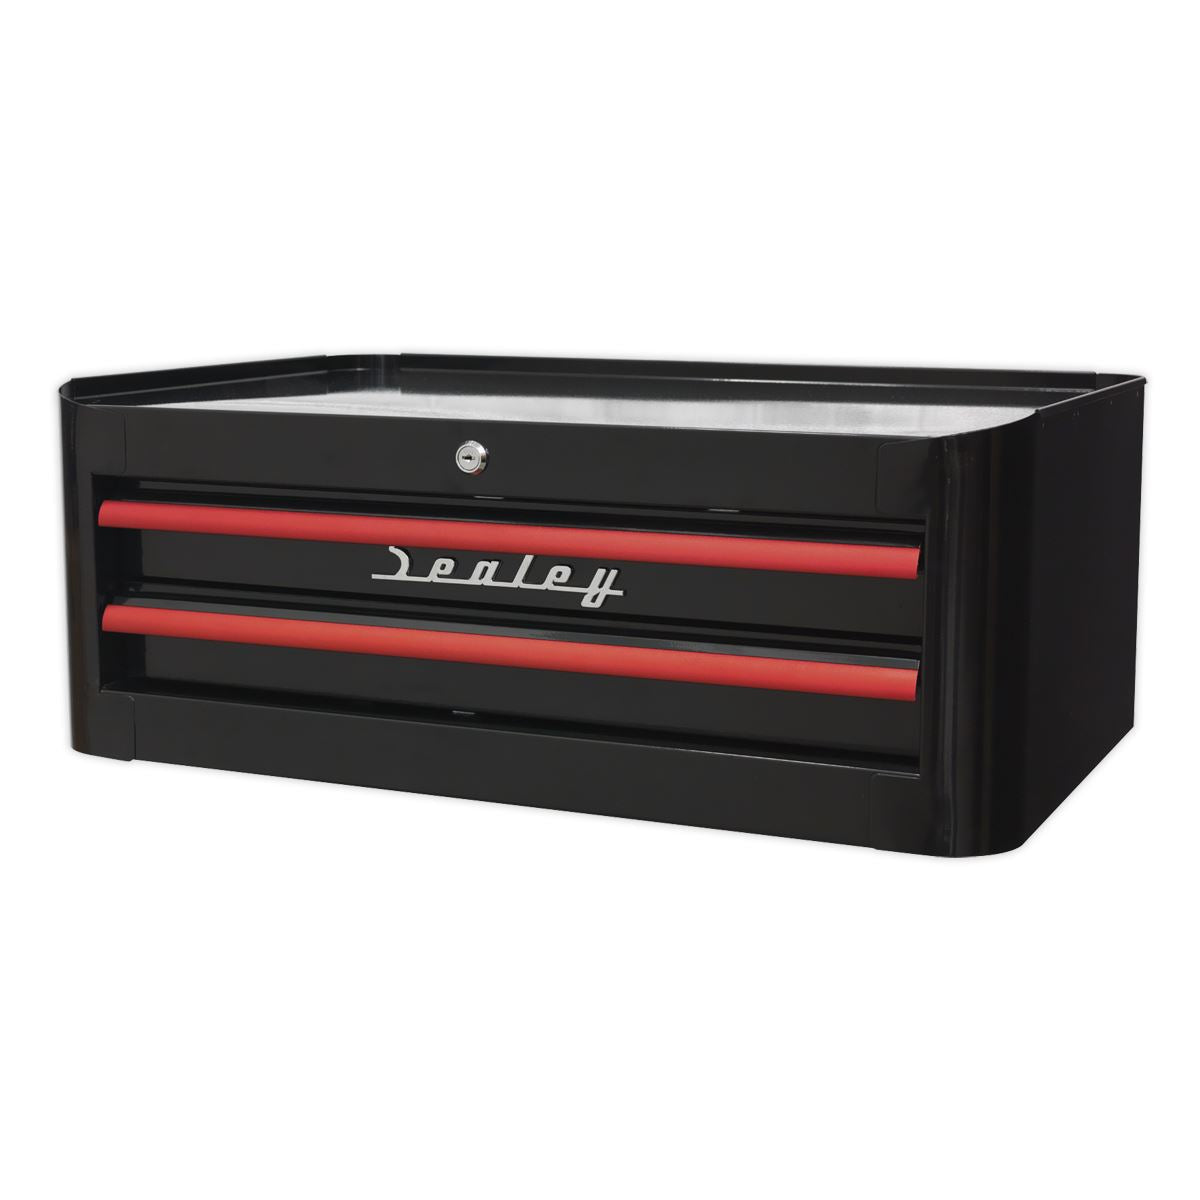 Sealey Premier Mid-Box Tool Chest 2 Drawer Retro Style - Black with Red Anodised Drawer Pulls